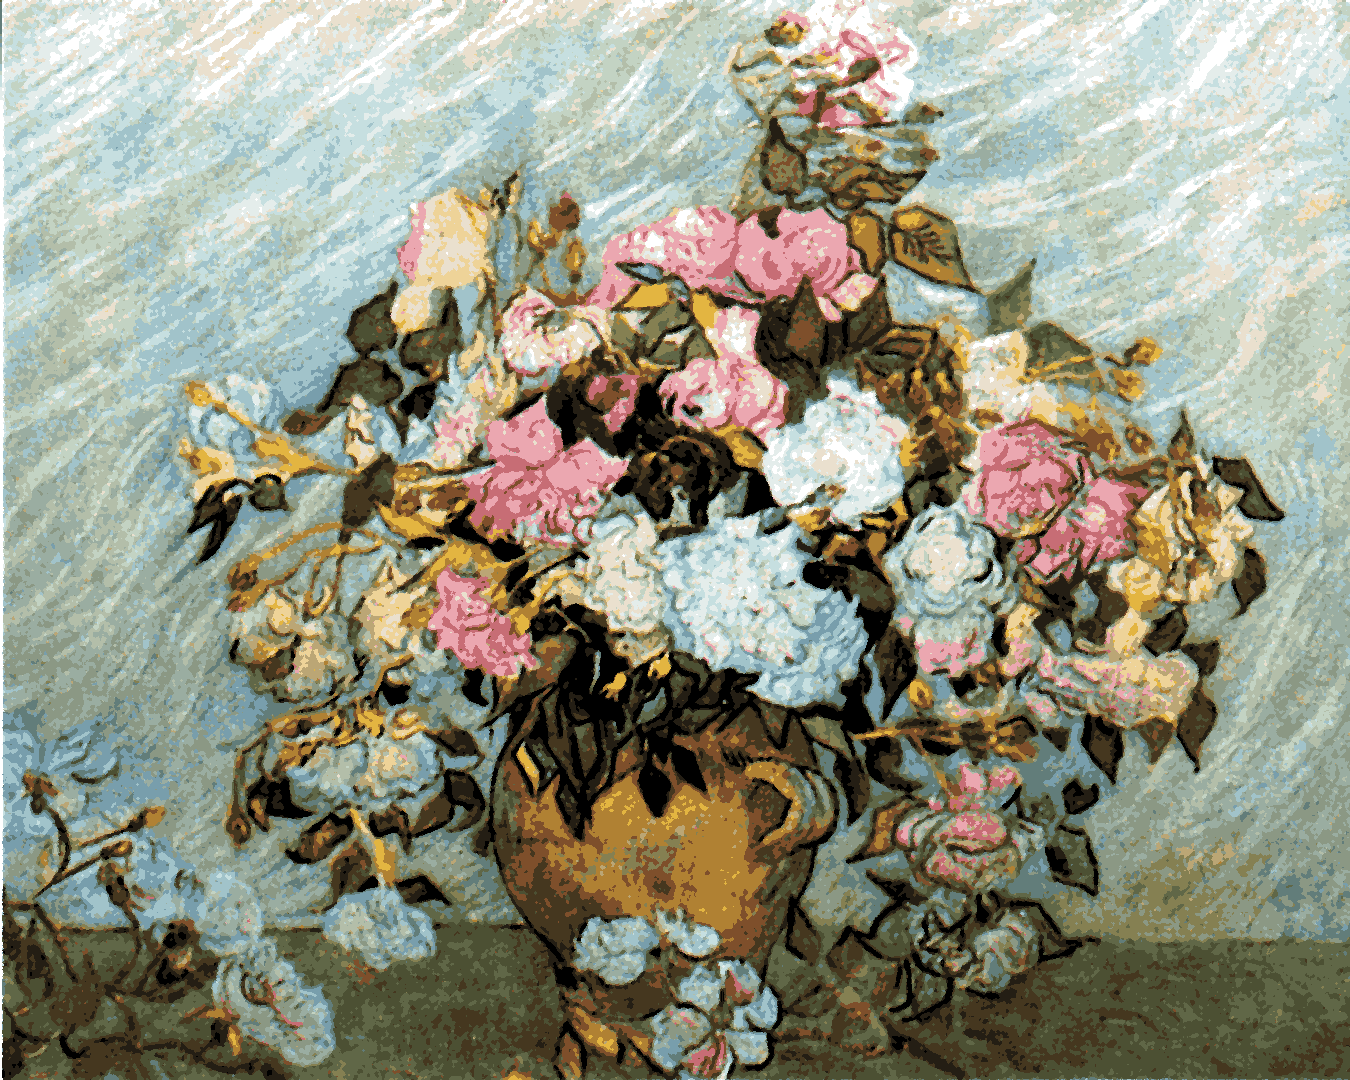 Vincent Van Gogh PD - (125) - Still Life Vase with Pink Roses - Van-Go Paint-By-Number Kit